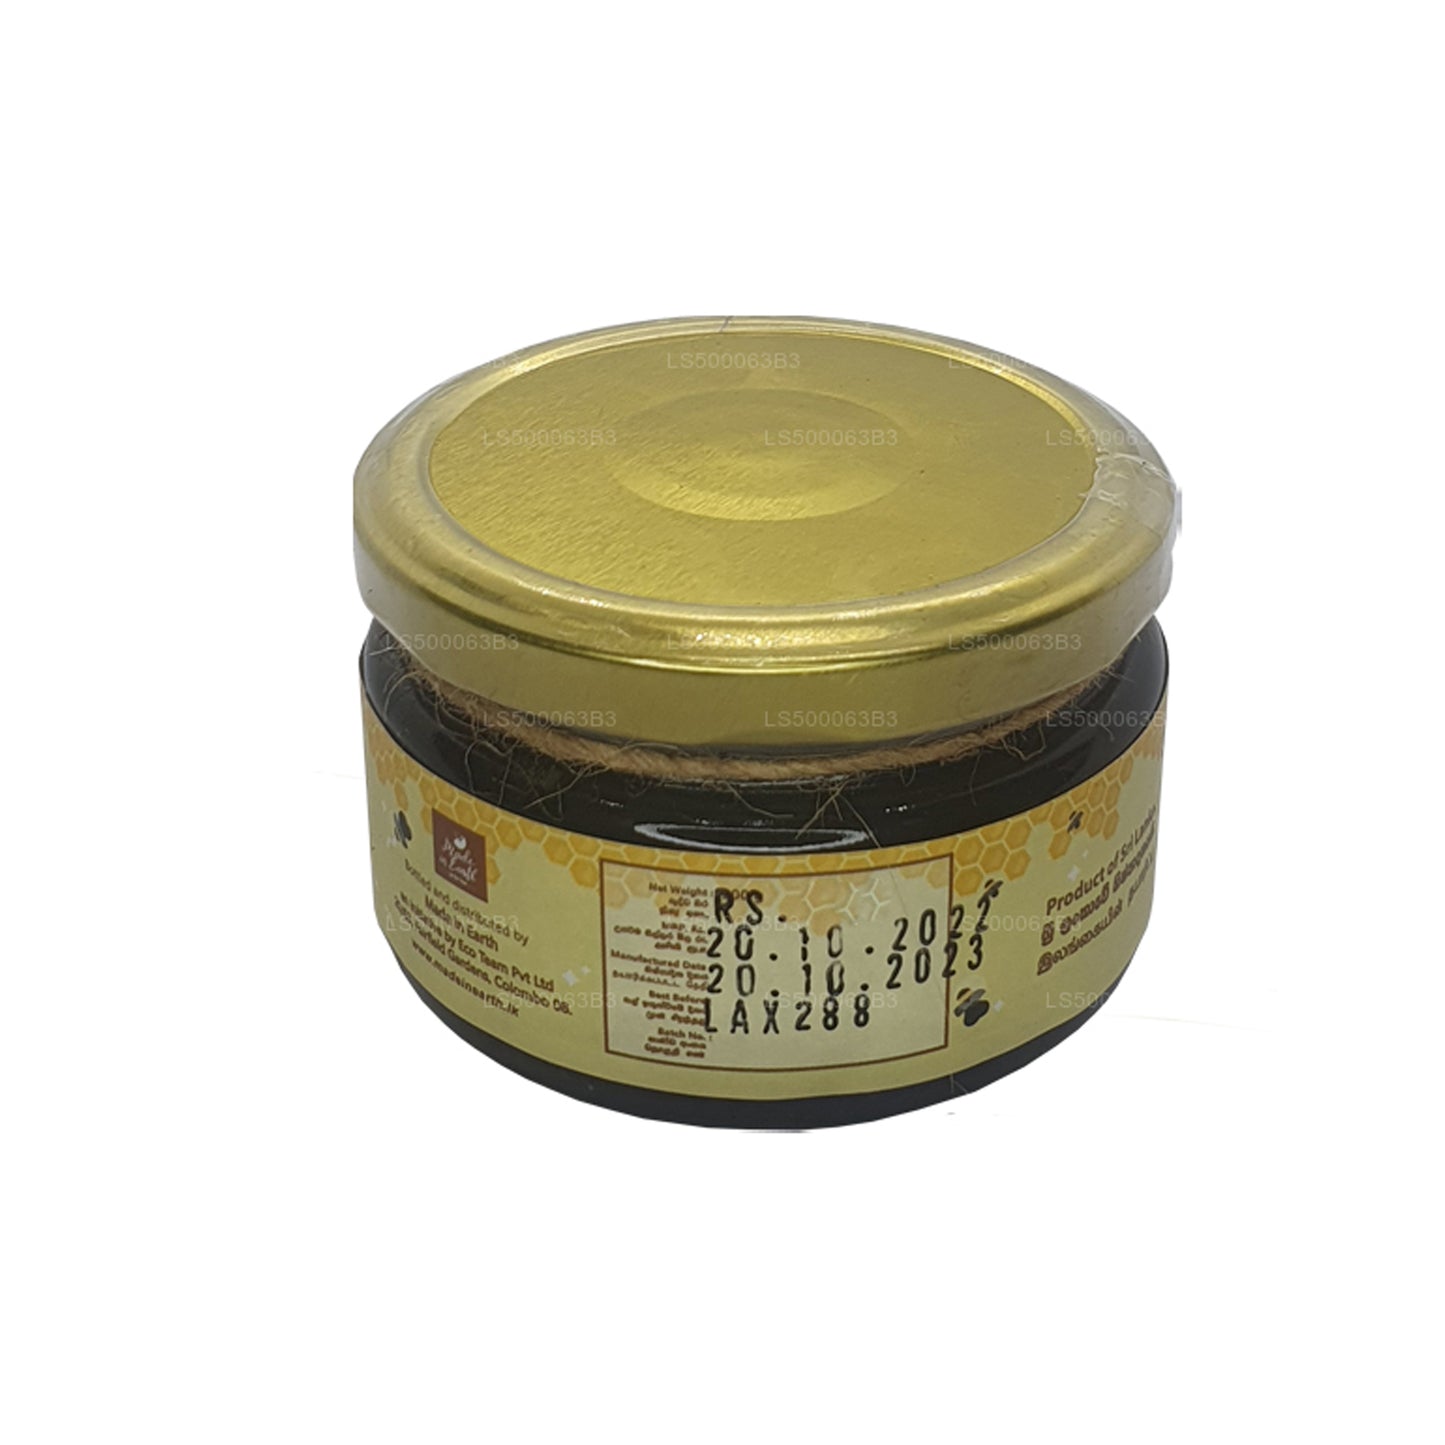 Made in Earth Pure Forest Bee Miód (200g)